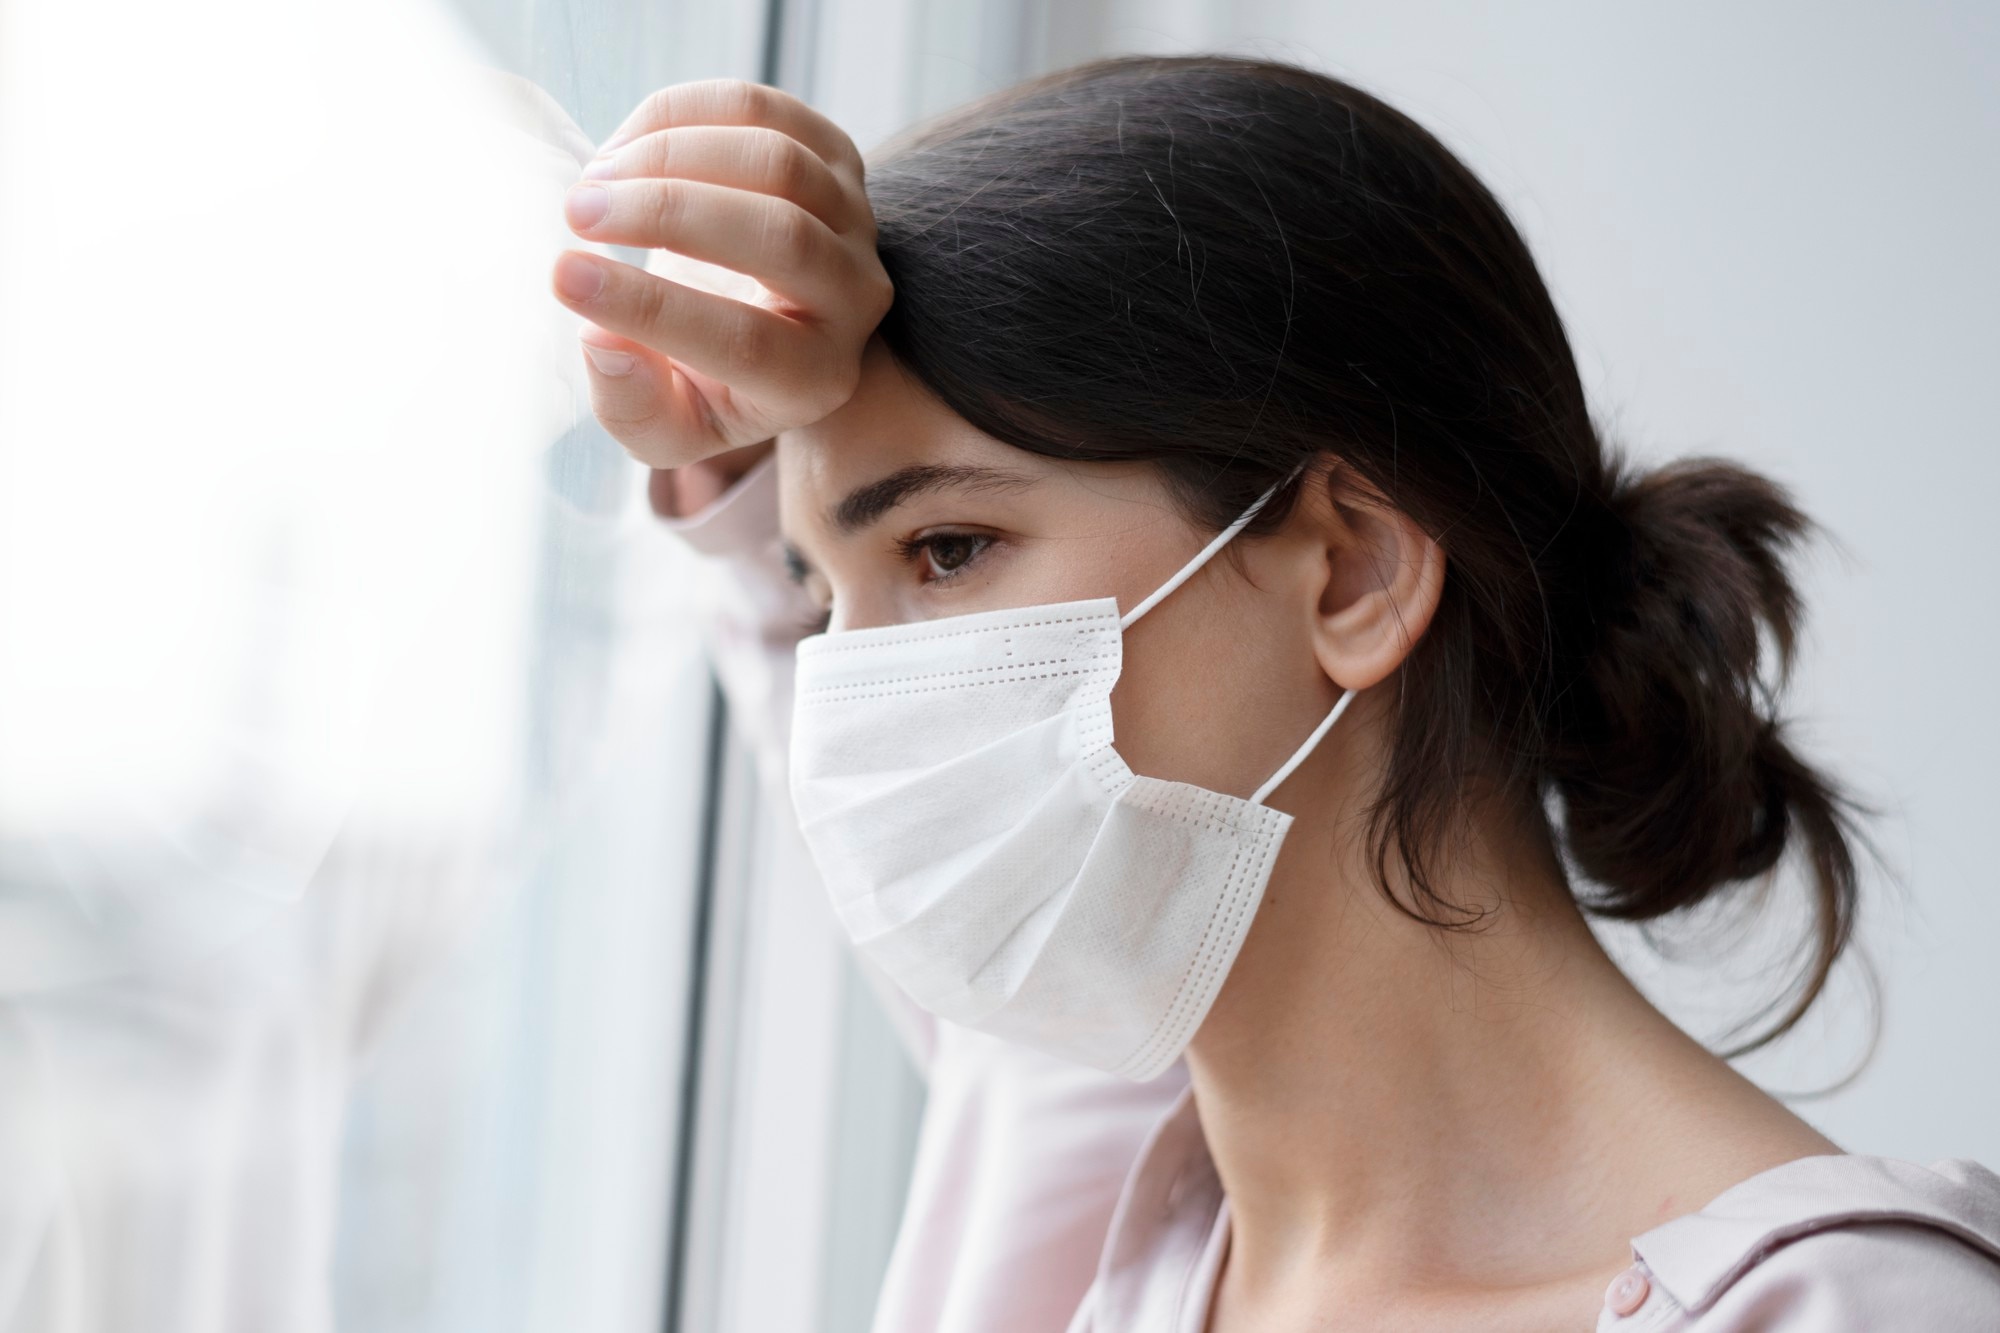 Poor Air Quality Index? Here Are Quick Tips To Protect and Cleanse Your Lungs